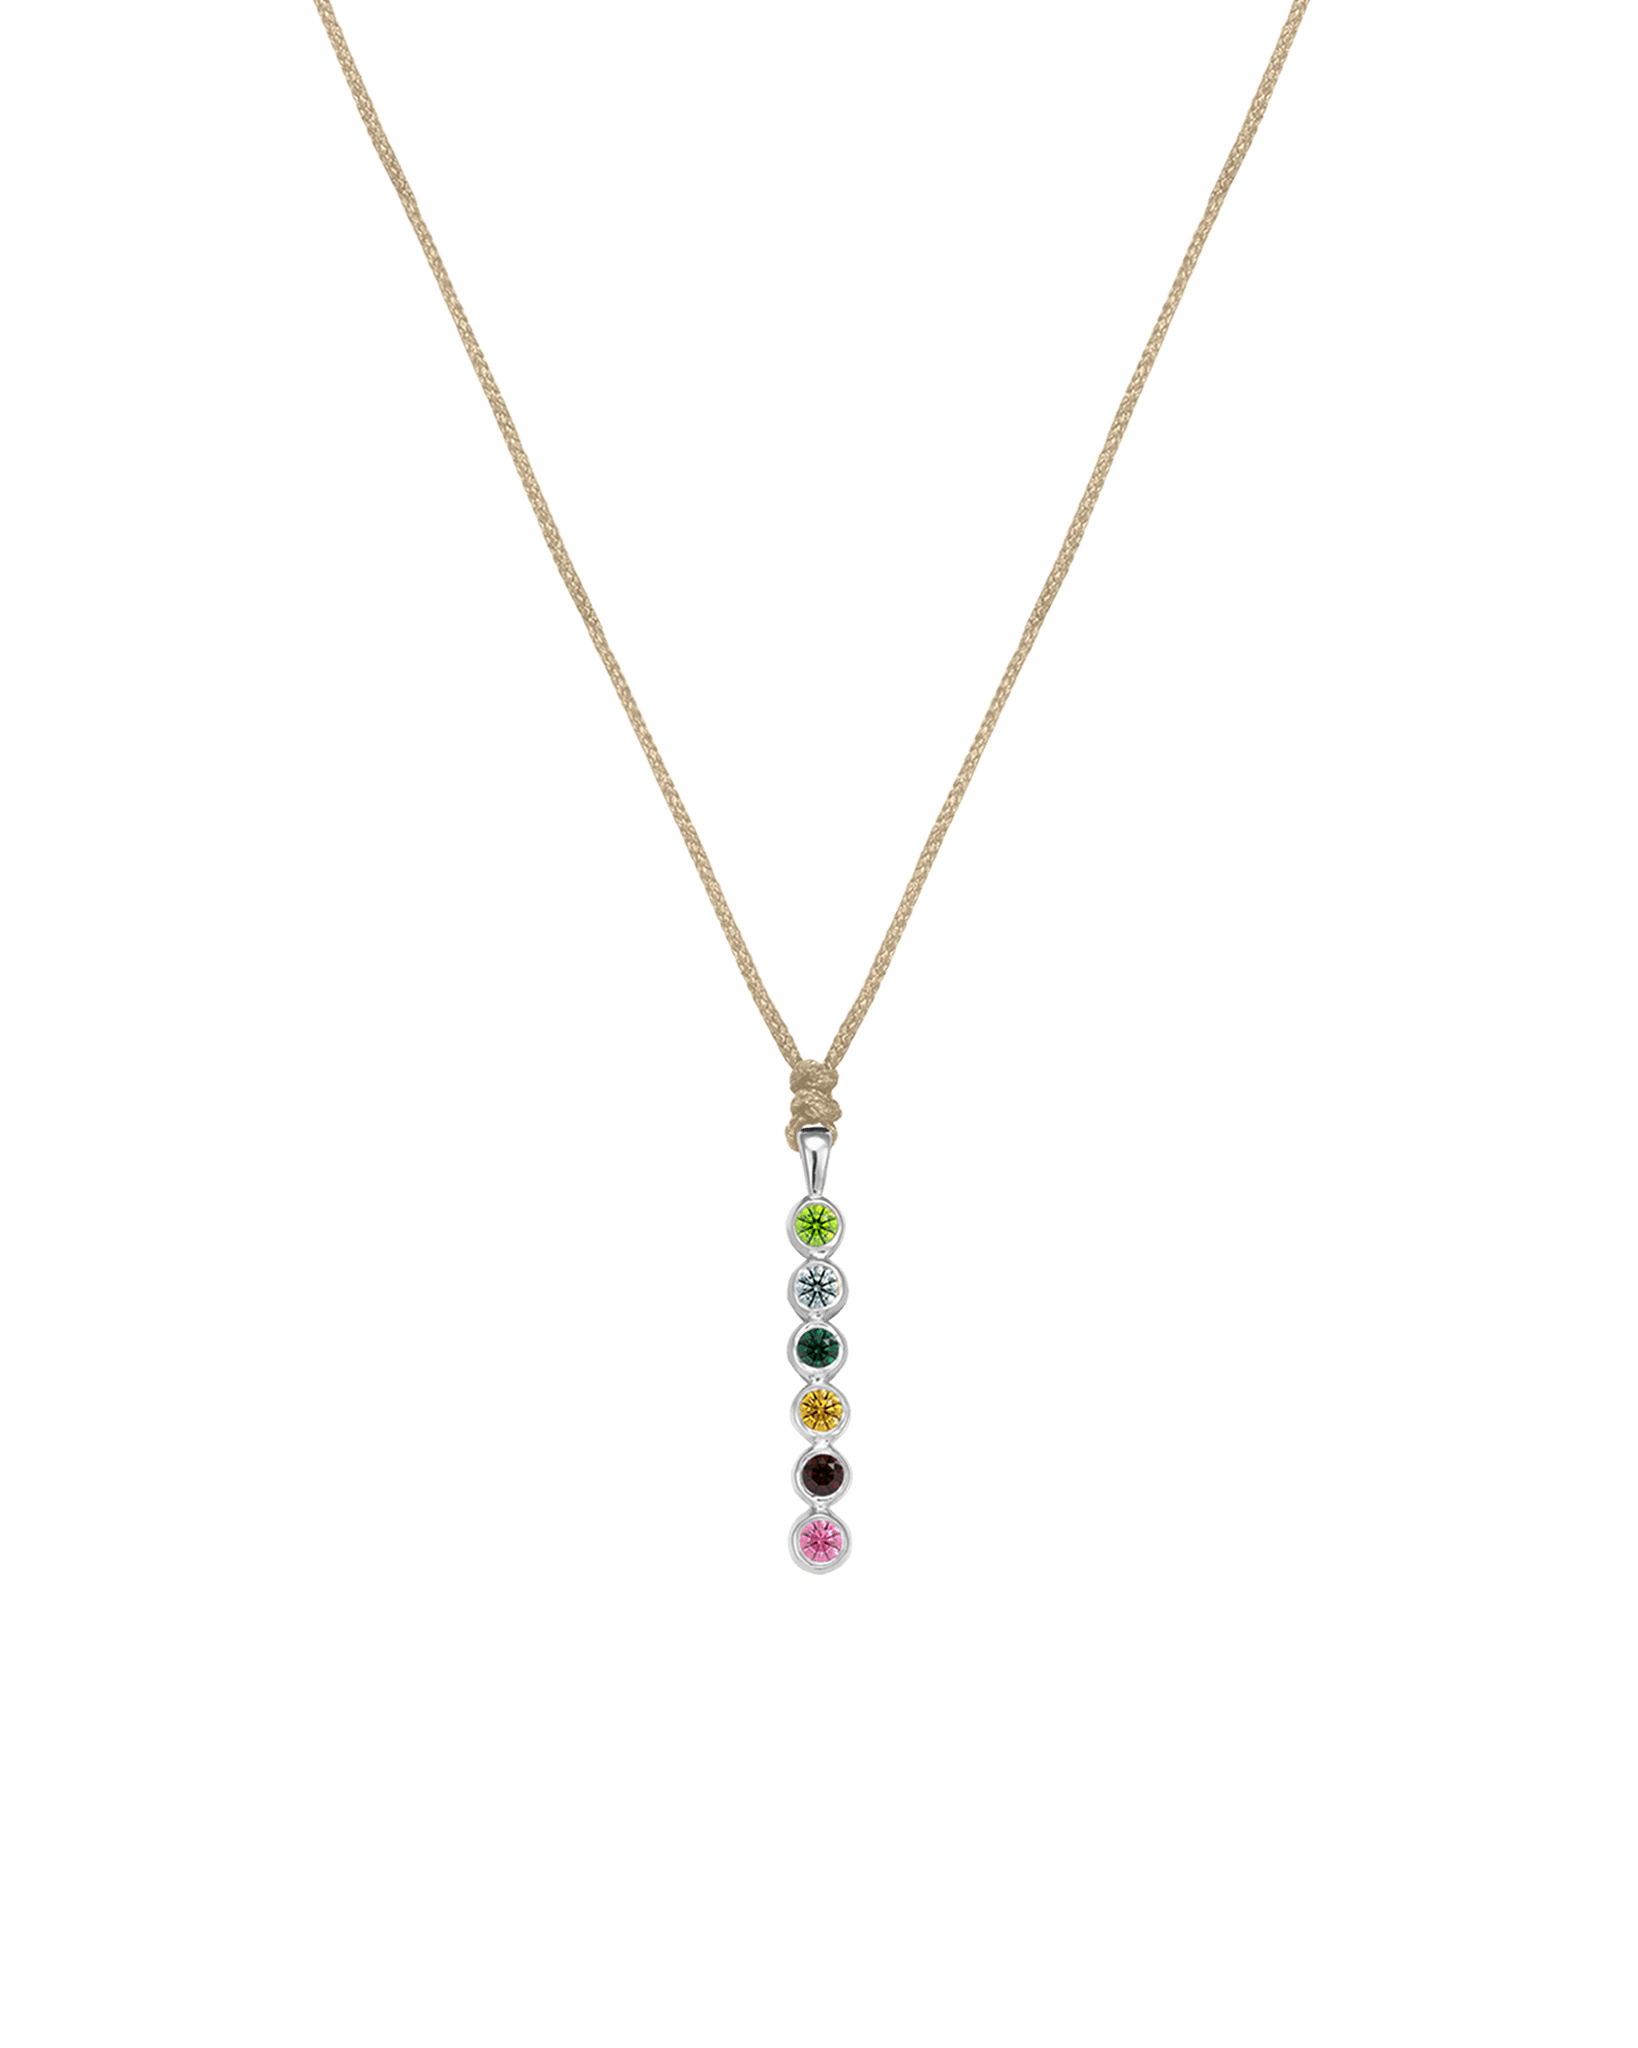 The Birthstones Bar Necklace - 14K White Gold Necklaces 14K Solid Gold Sand 2 